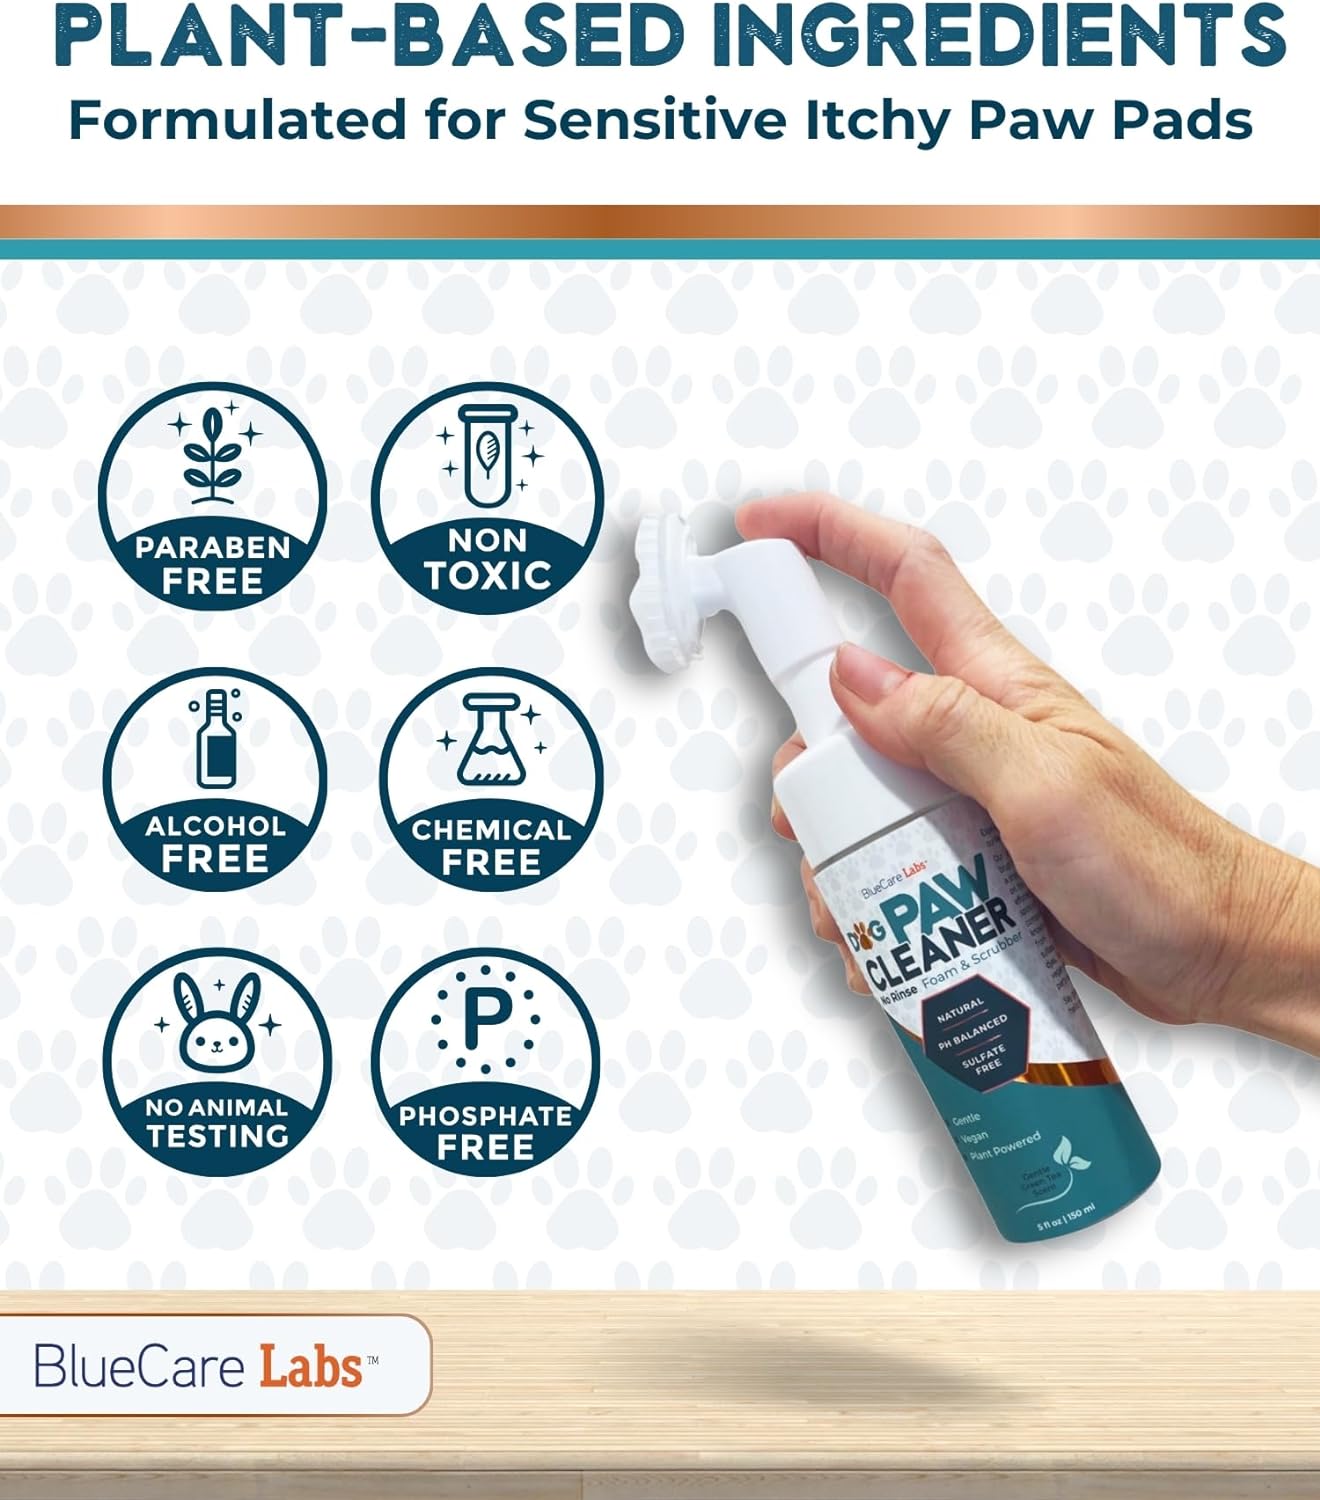 Dog Paw Cleaner for Dogs Paw Washer No Rinse Waterless Dog Shampoo for Sensitive Skin & Dry Itchy Paw Relief for Large Dog Washing Brush for Small Dogs Cat Paw Cleaner Foot Washer Organic Foam 5fl oz.